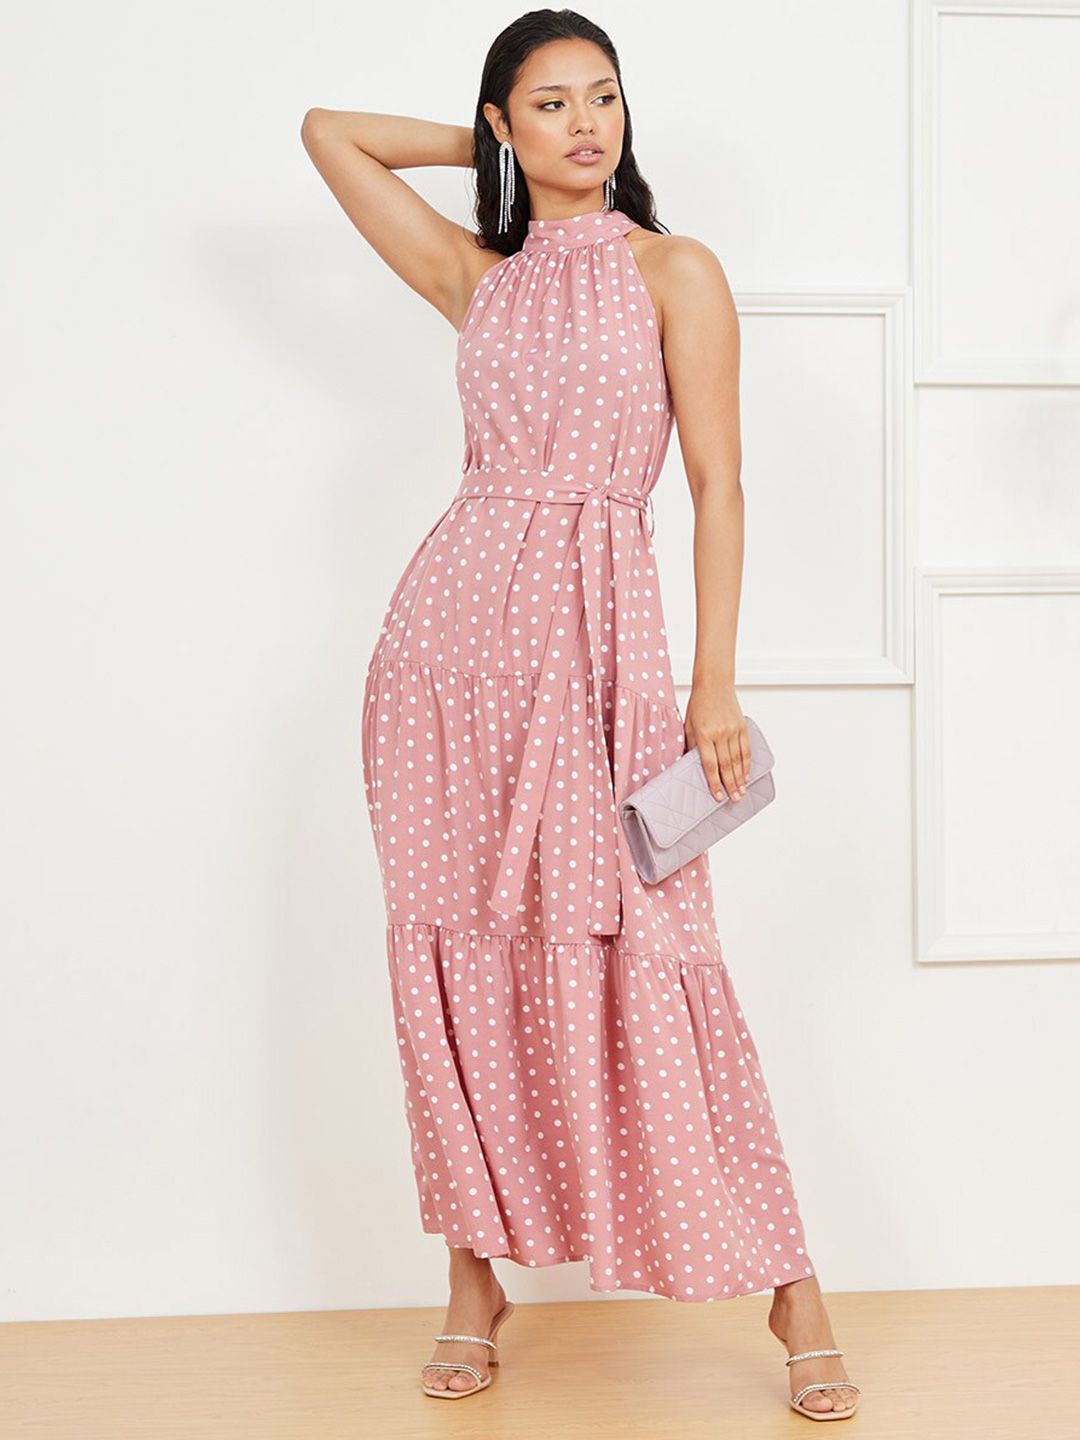 Styli Pink Floral Maxi Dress Price in India